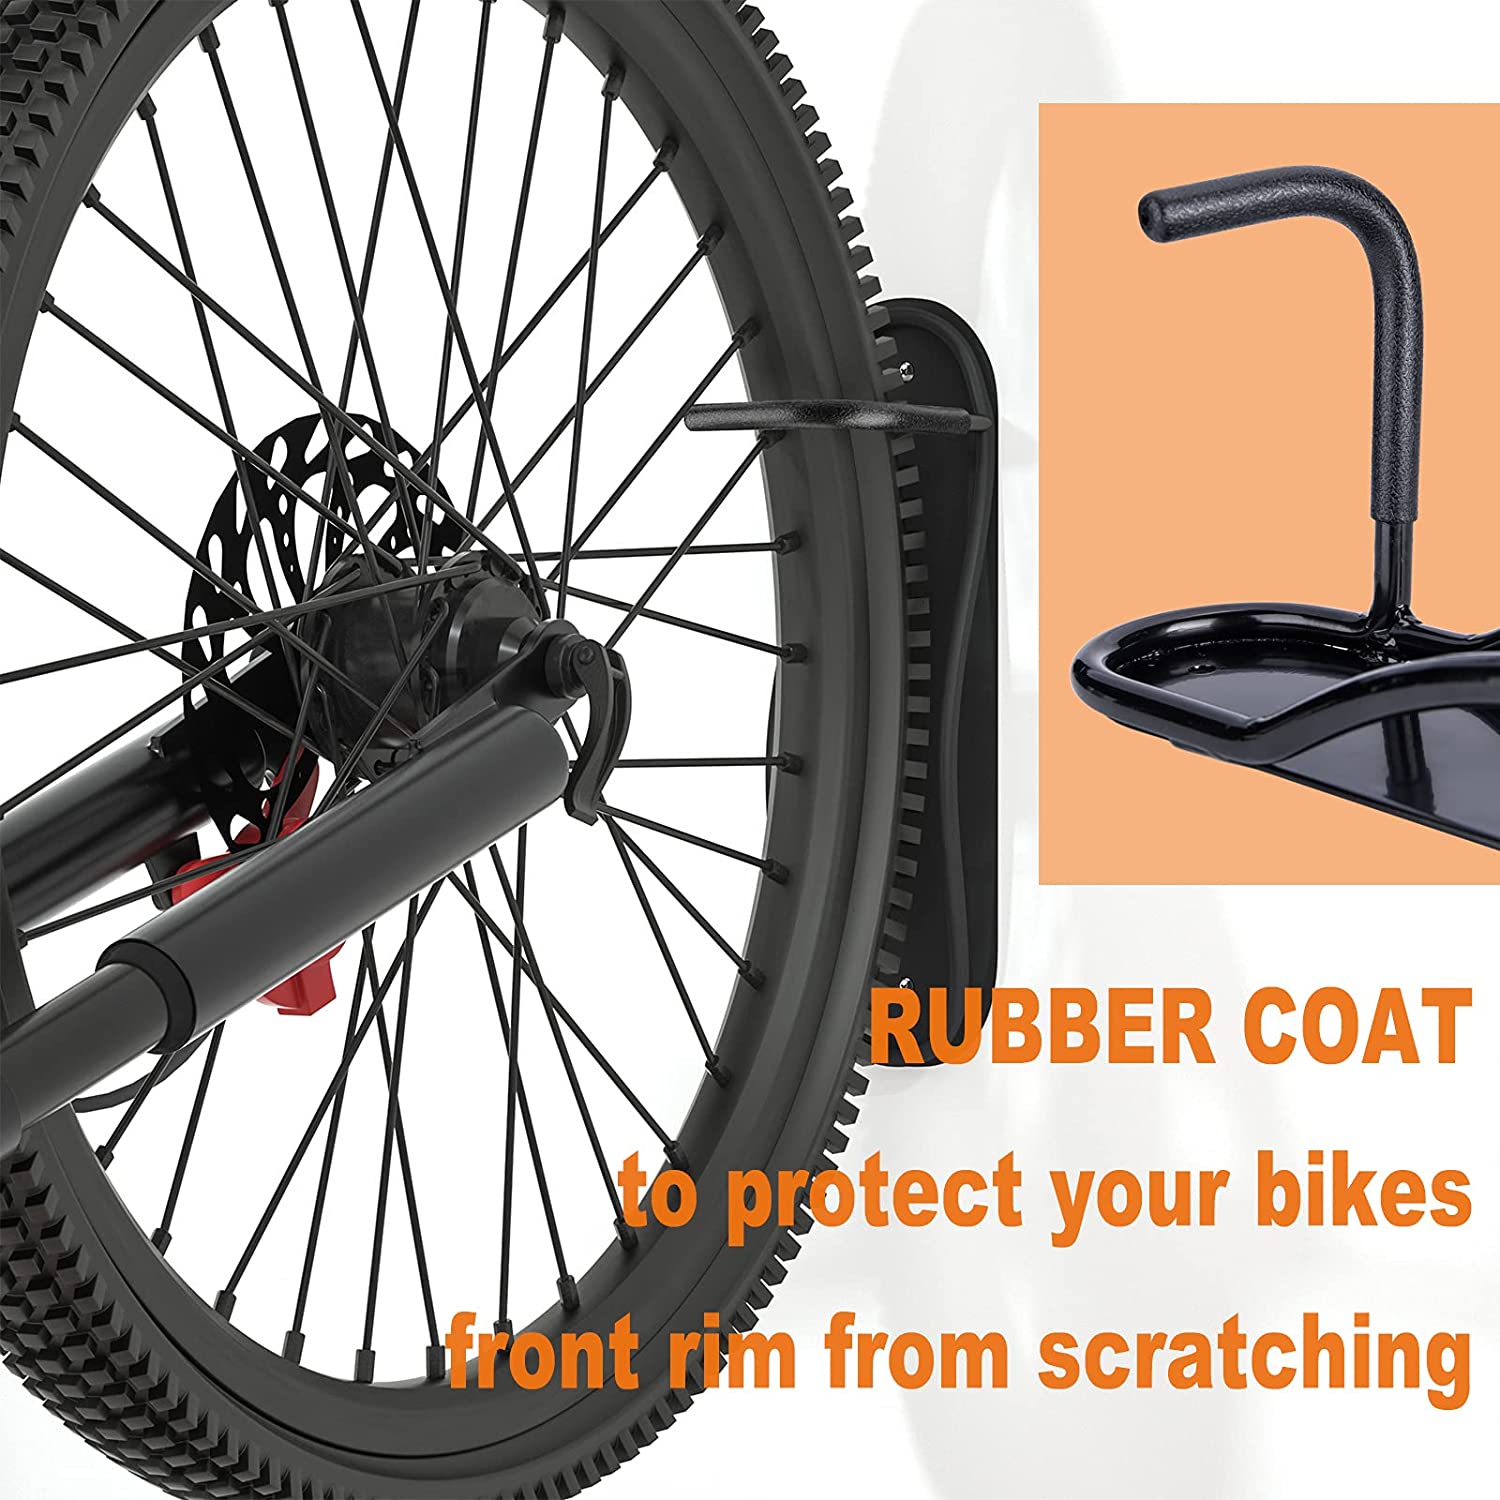 Bike Wall Mount Rack with Tire Tray - Bicycle Storage Rack Easy to Install - Space Saver Holder, Hook for Road, Mountain or Hybrid Bikes